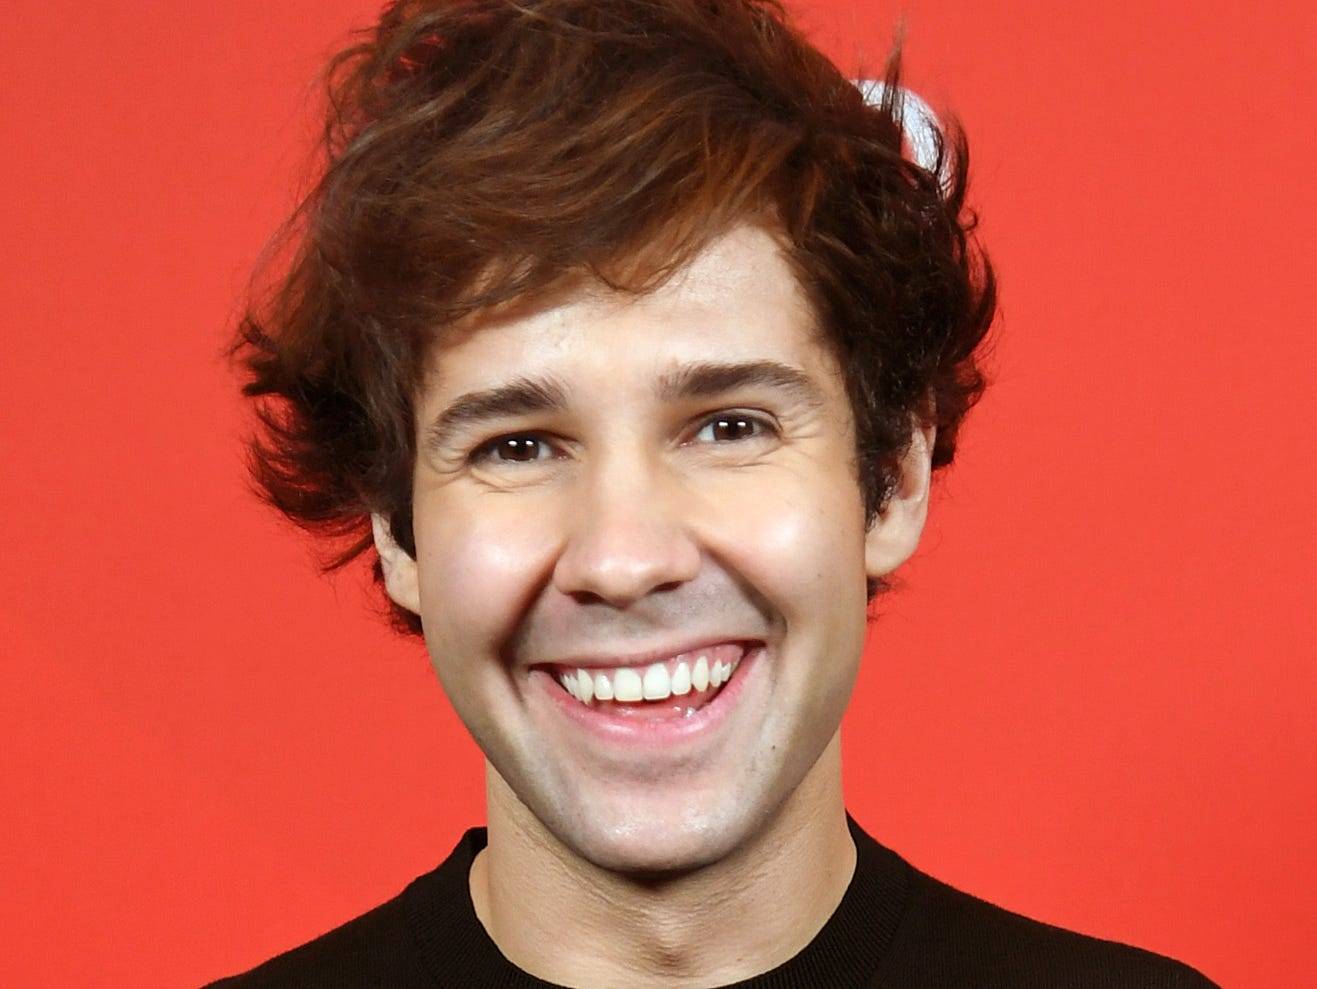 David Dobrik is giving away $100,000 with this puzzle | Business